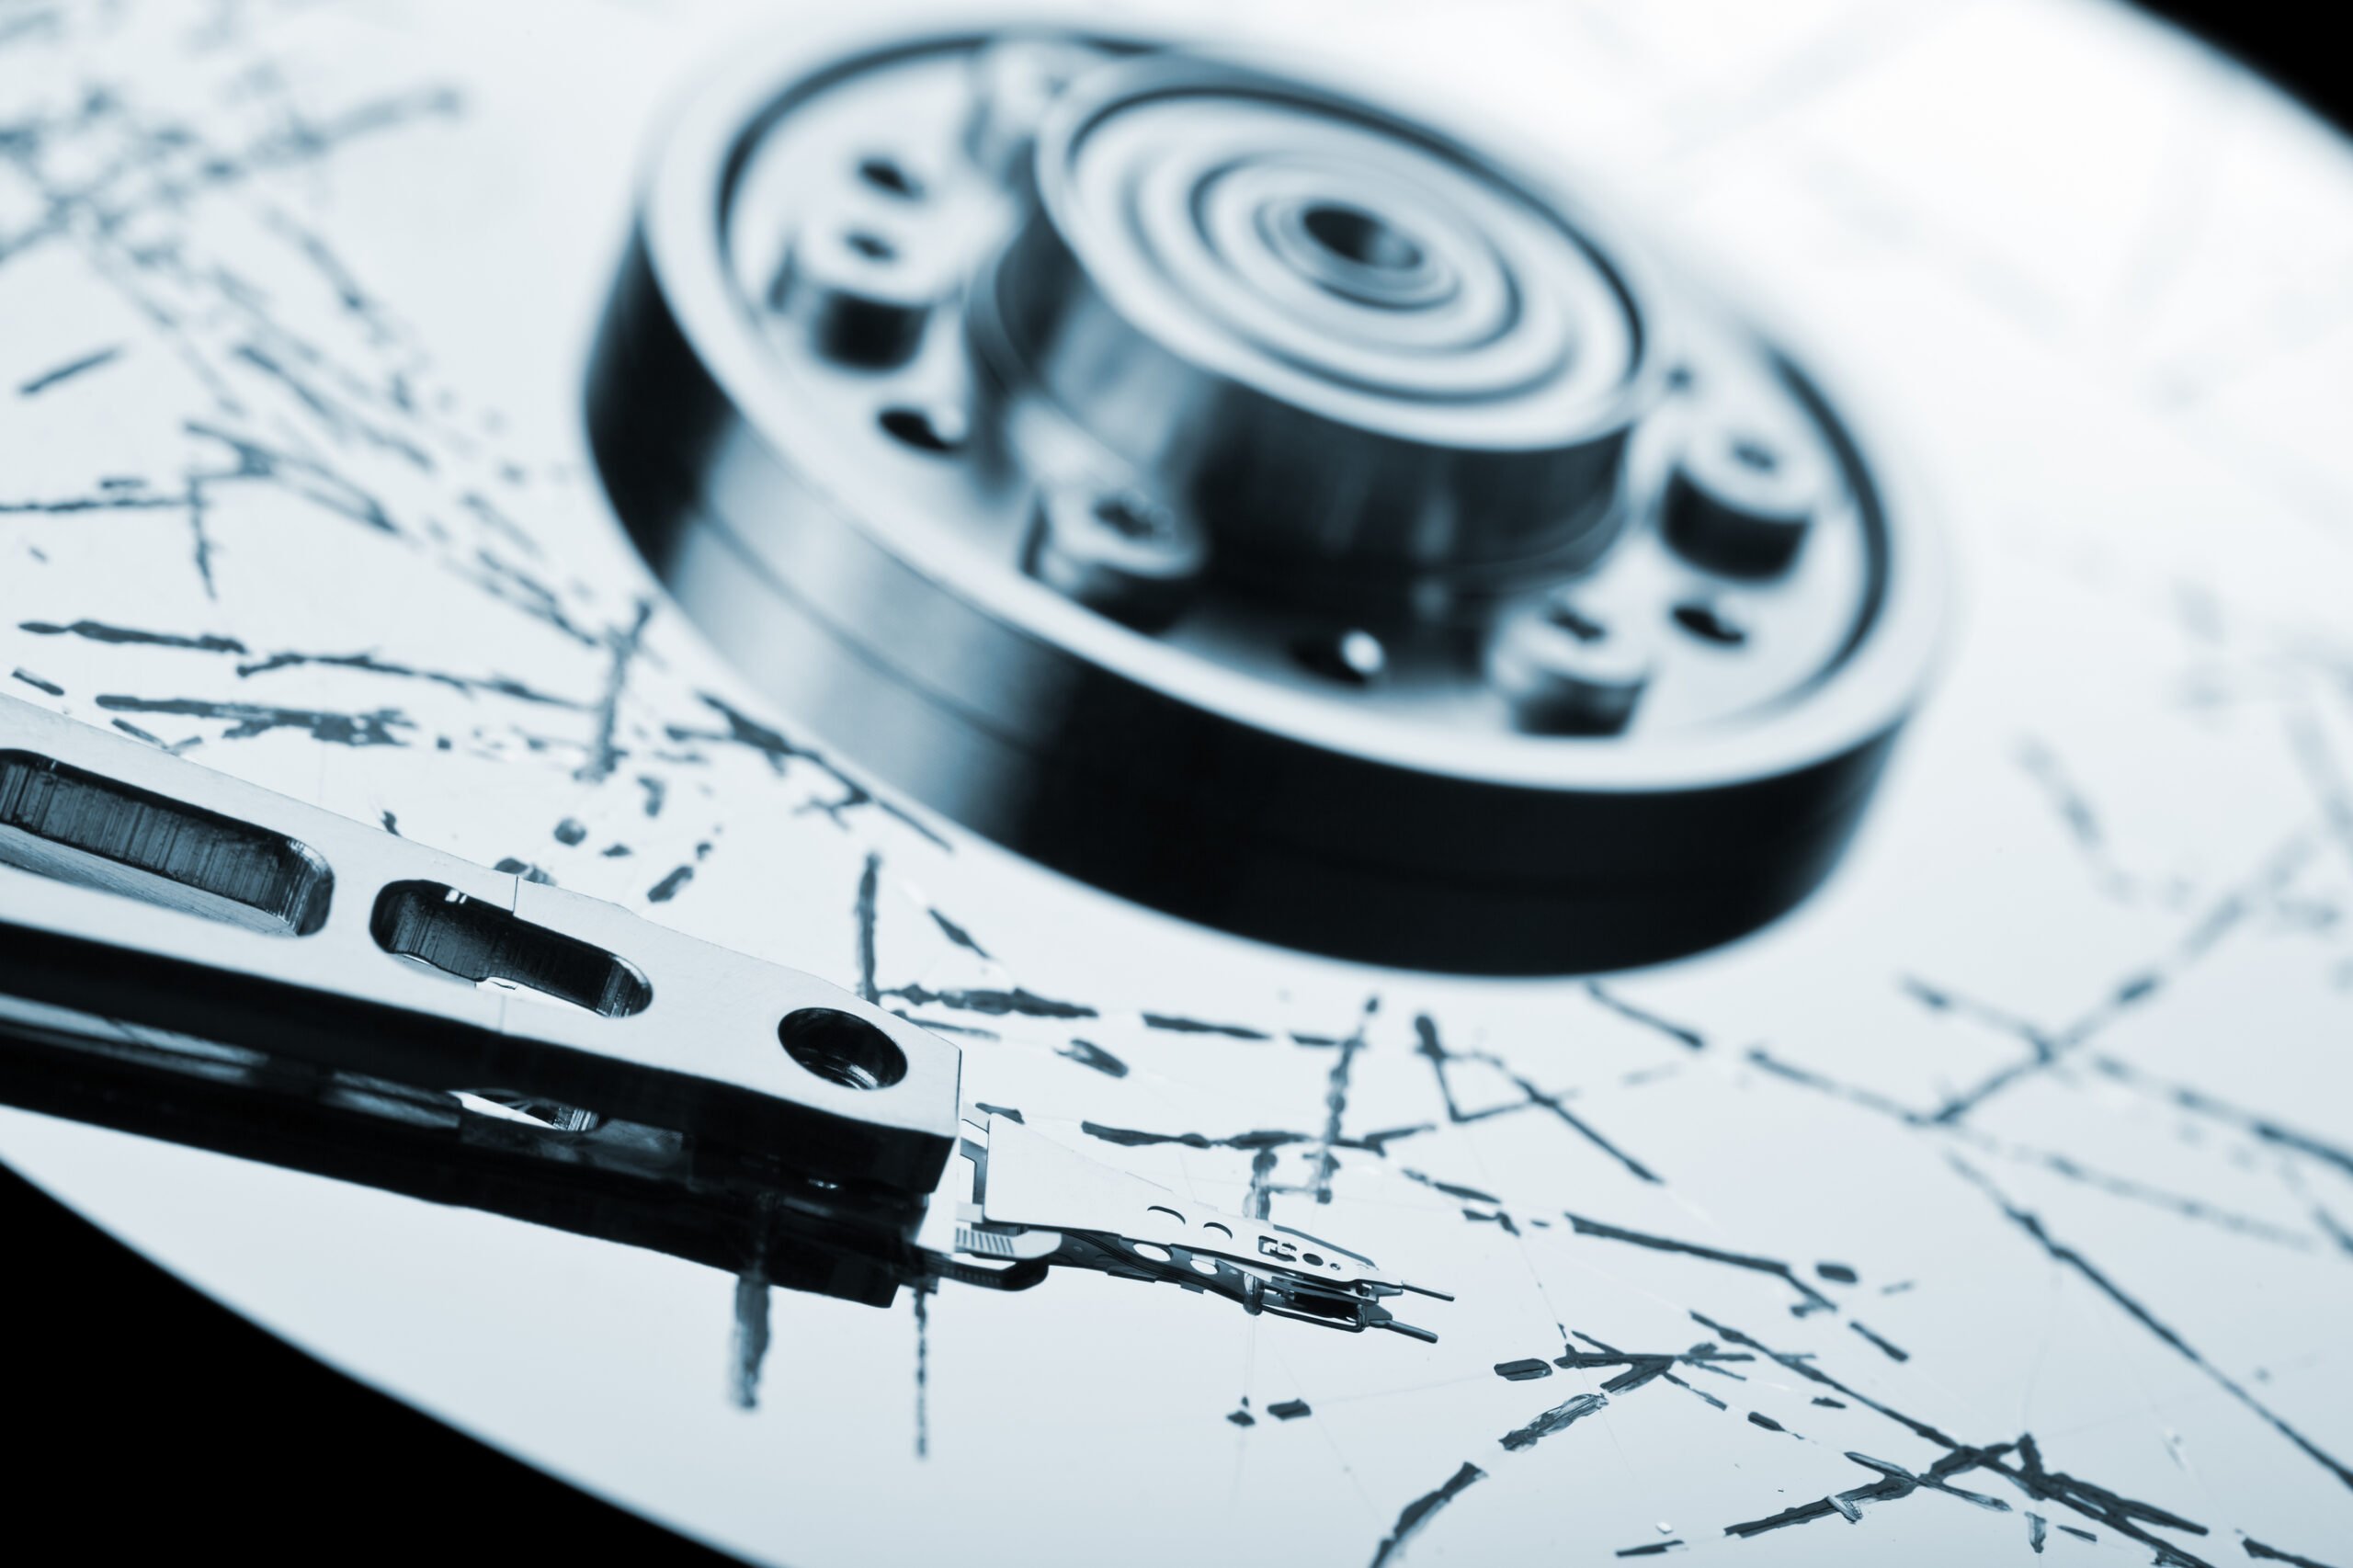 Data Recovery Services Are Crucial in the Big Data Era